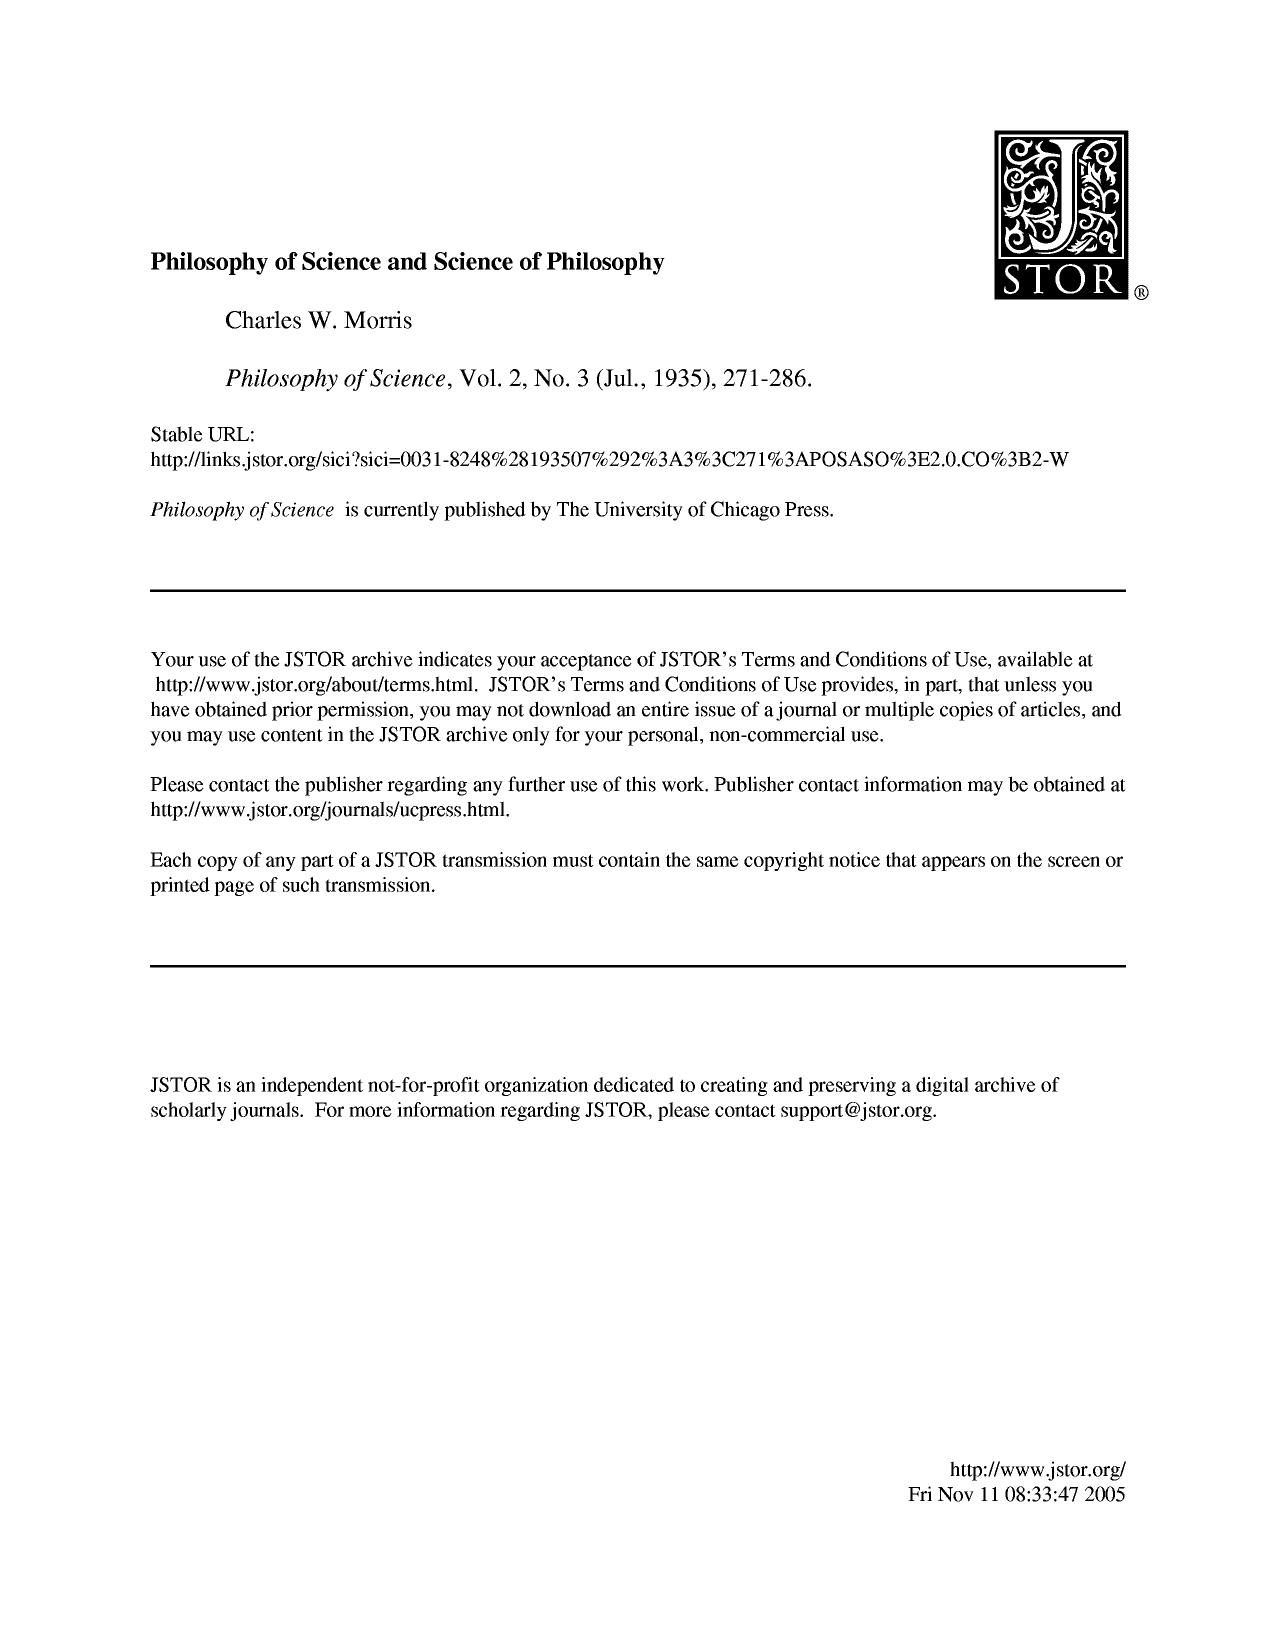 Philosophy of Science and Science of Philosophy - Paper